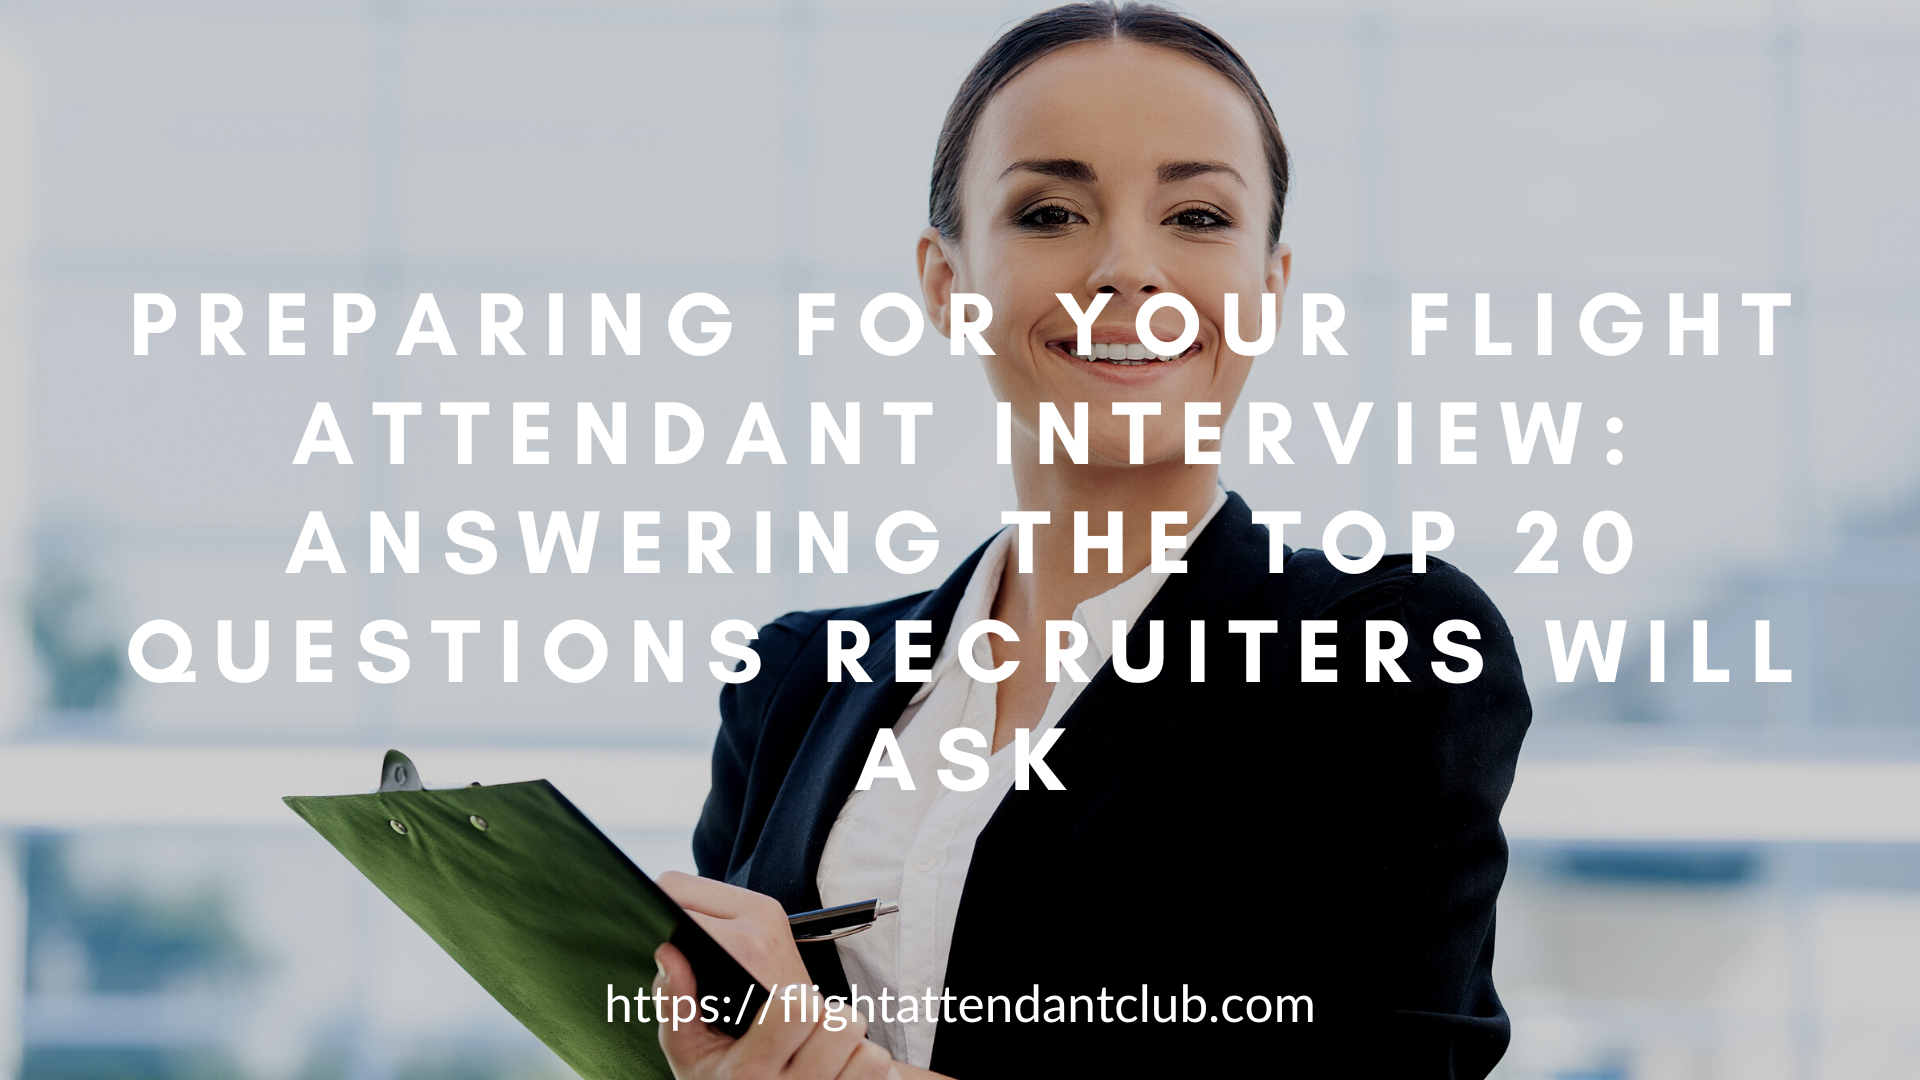 Preparing for Your Flight Attendant Interview Answering the Top 20 Questions Recruiters Will Ask